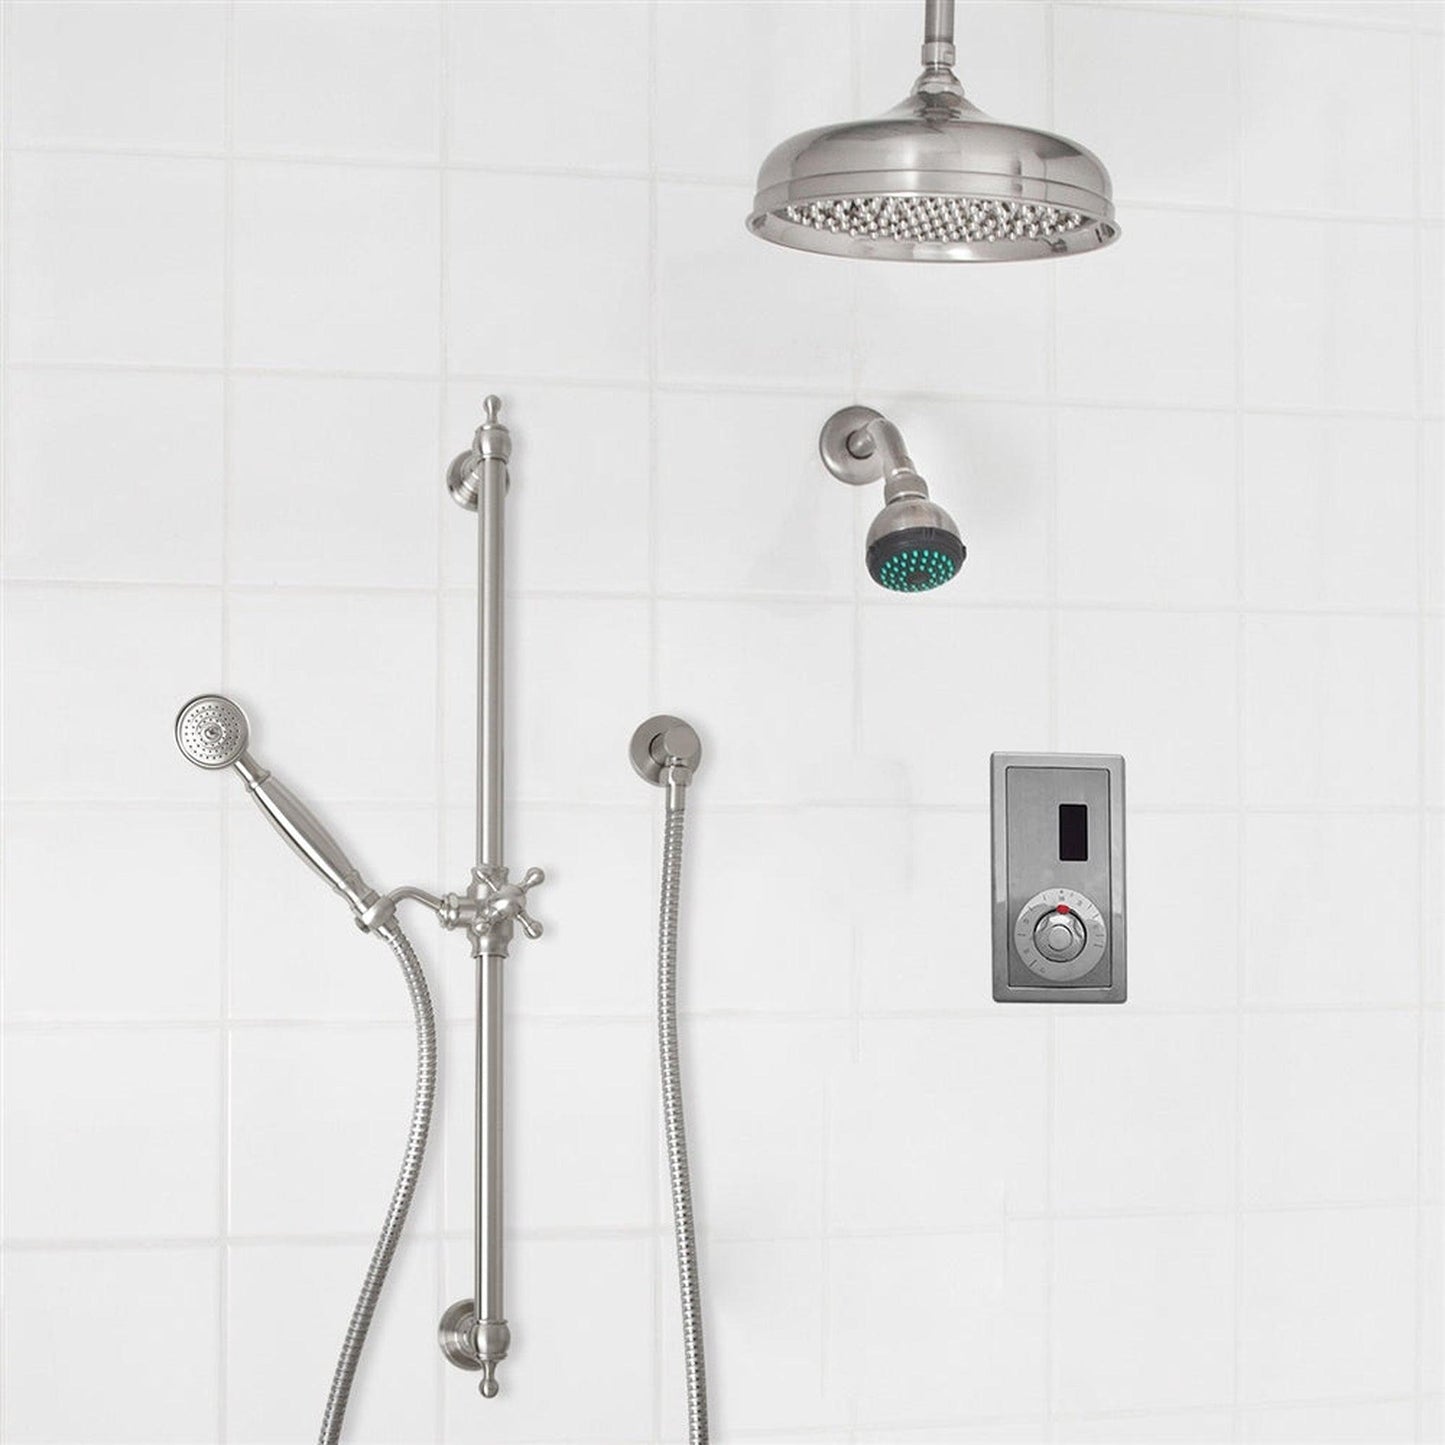 Fontana 16" Brushed Nickel Dual Shower Head Luxury Bathroom Automatic Thermostatic Sensor Temperature Dial Shower System With Hand Shower